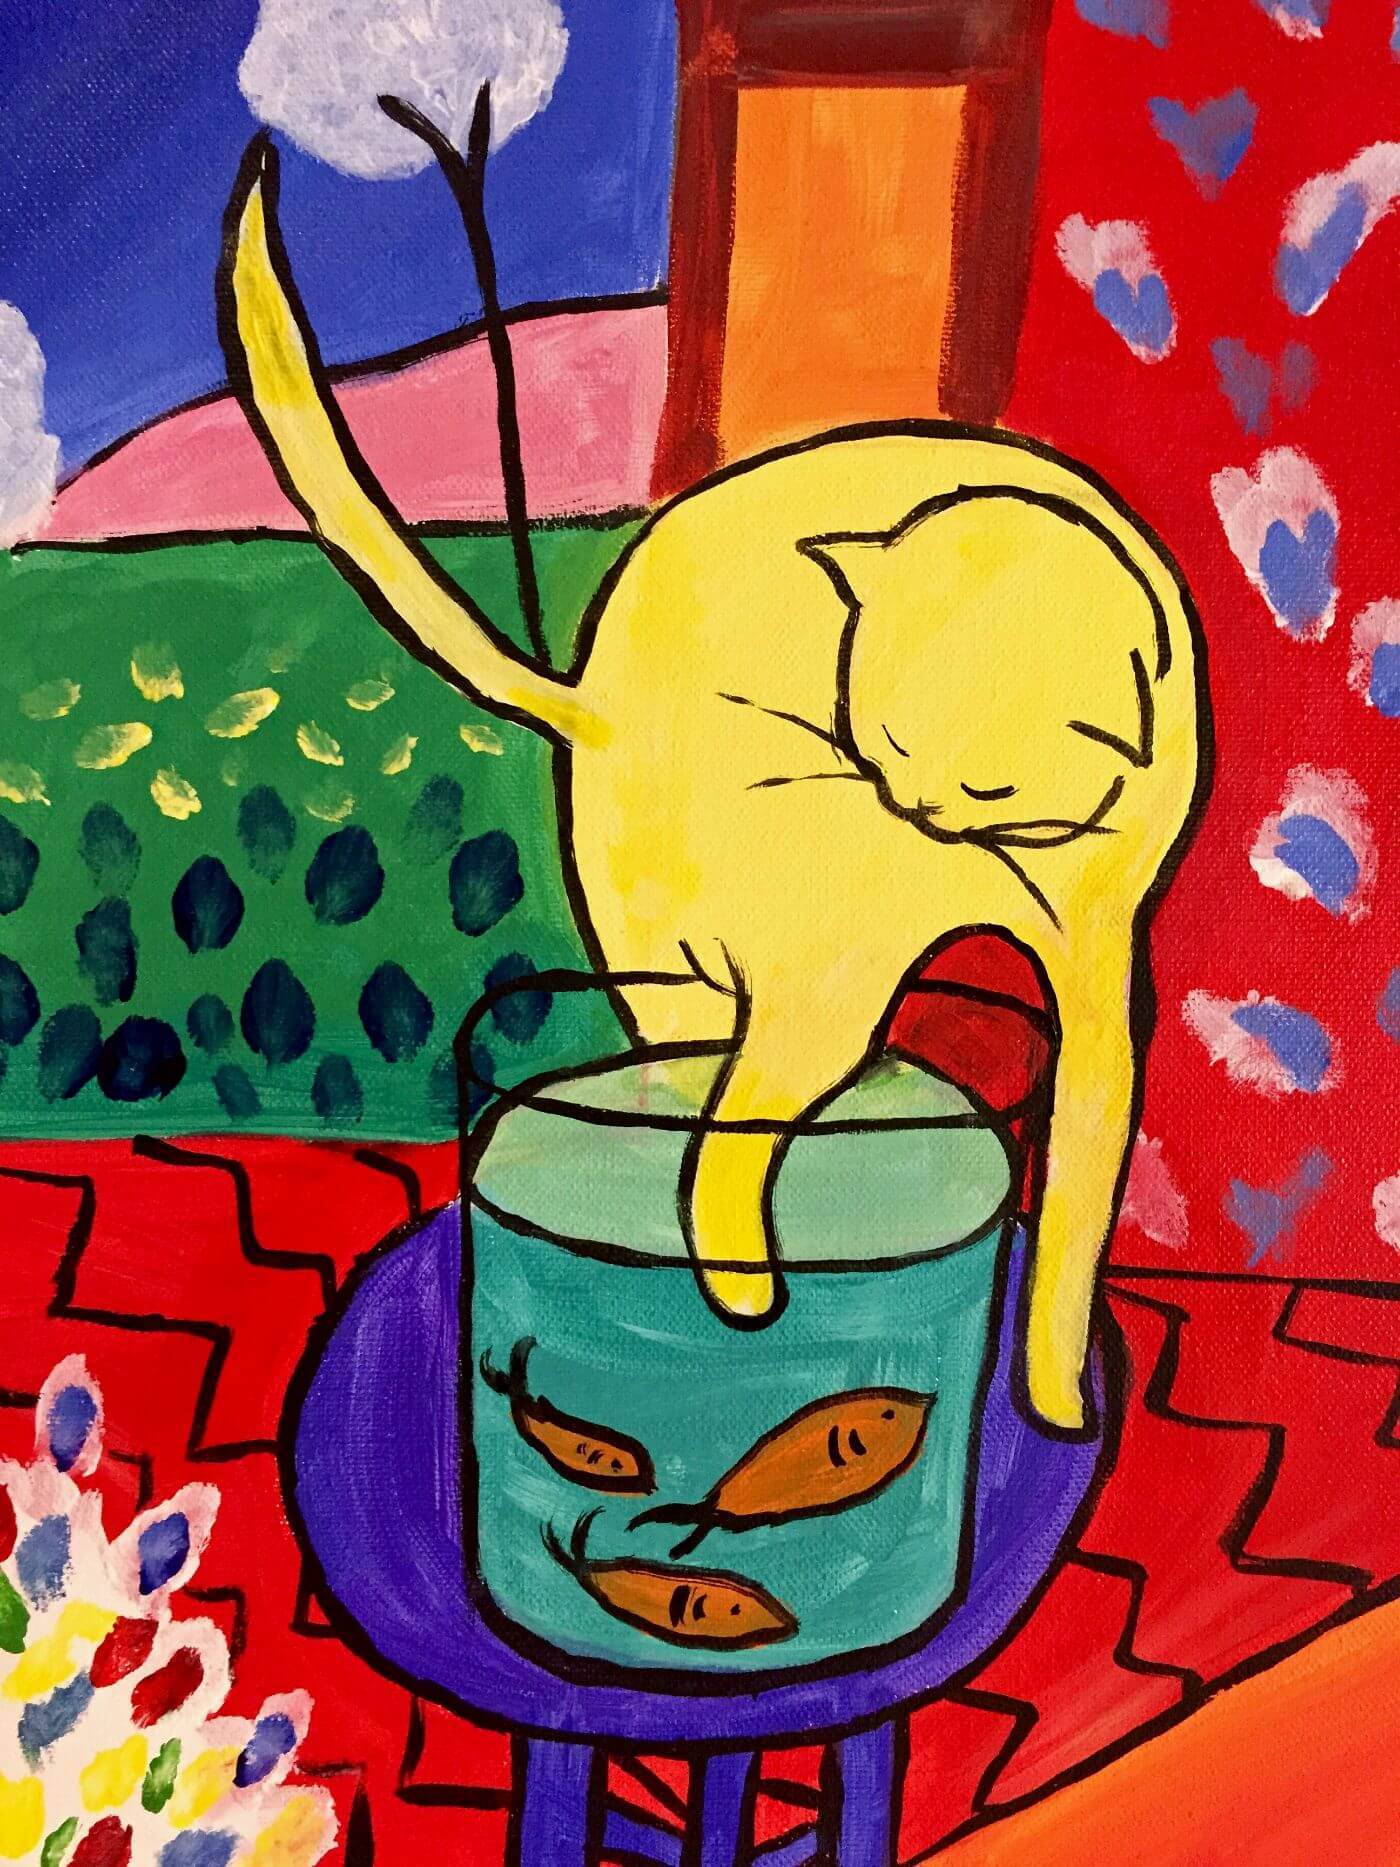 Blinke Kontrovers Produktiv Cat With Red Fish (Chat Aux Poissons Rouges) - Henri Matisse - Large Art  Prints by Henri Matisse | Buy Posters, Frames, Canvas & Digital Art Prints  | Small, Compact, Medium and Large Variants